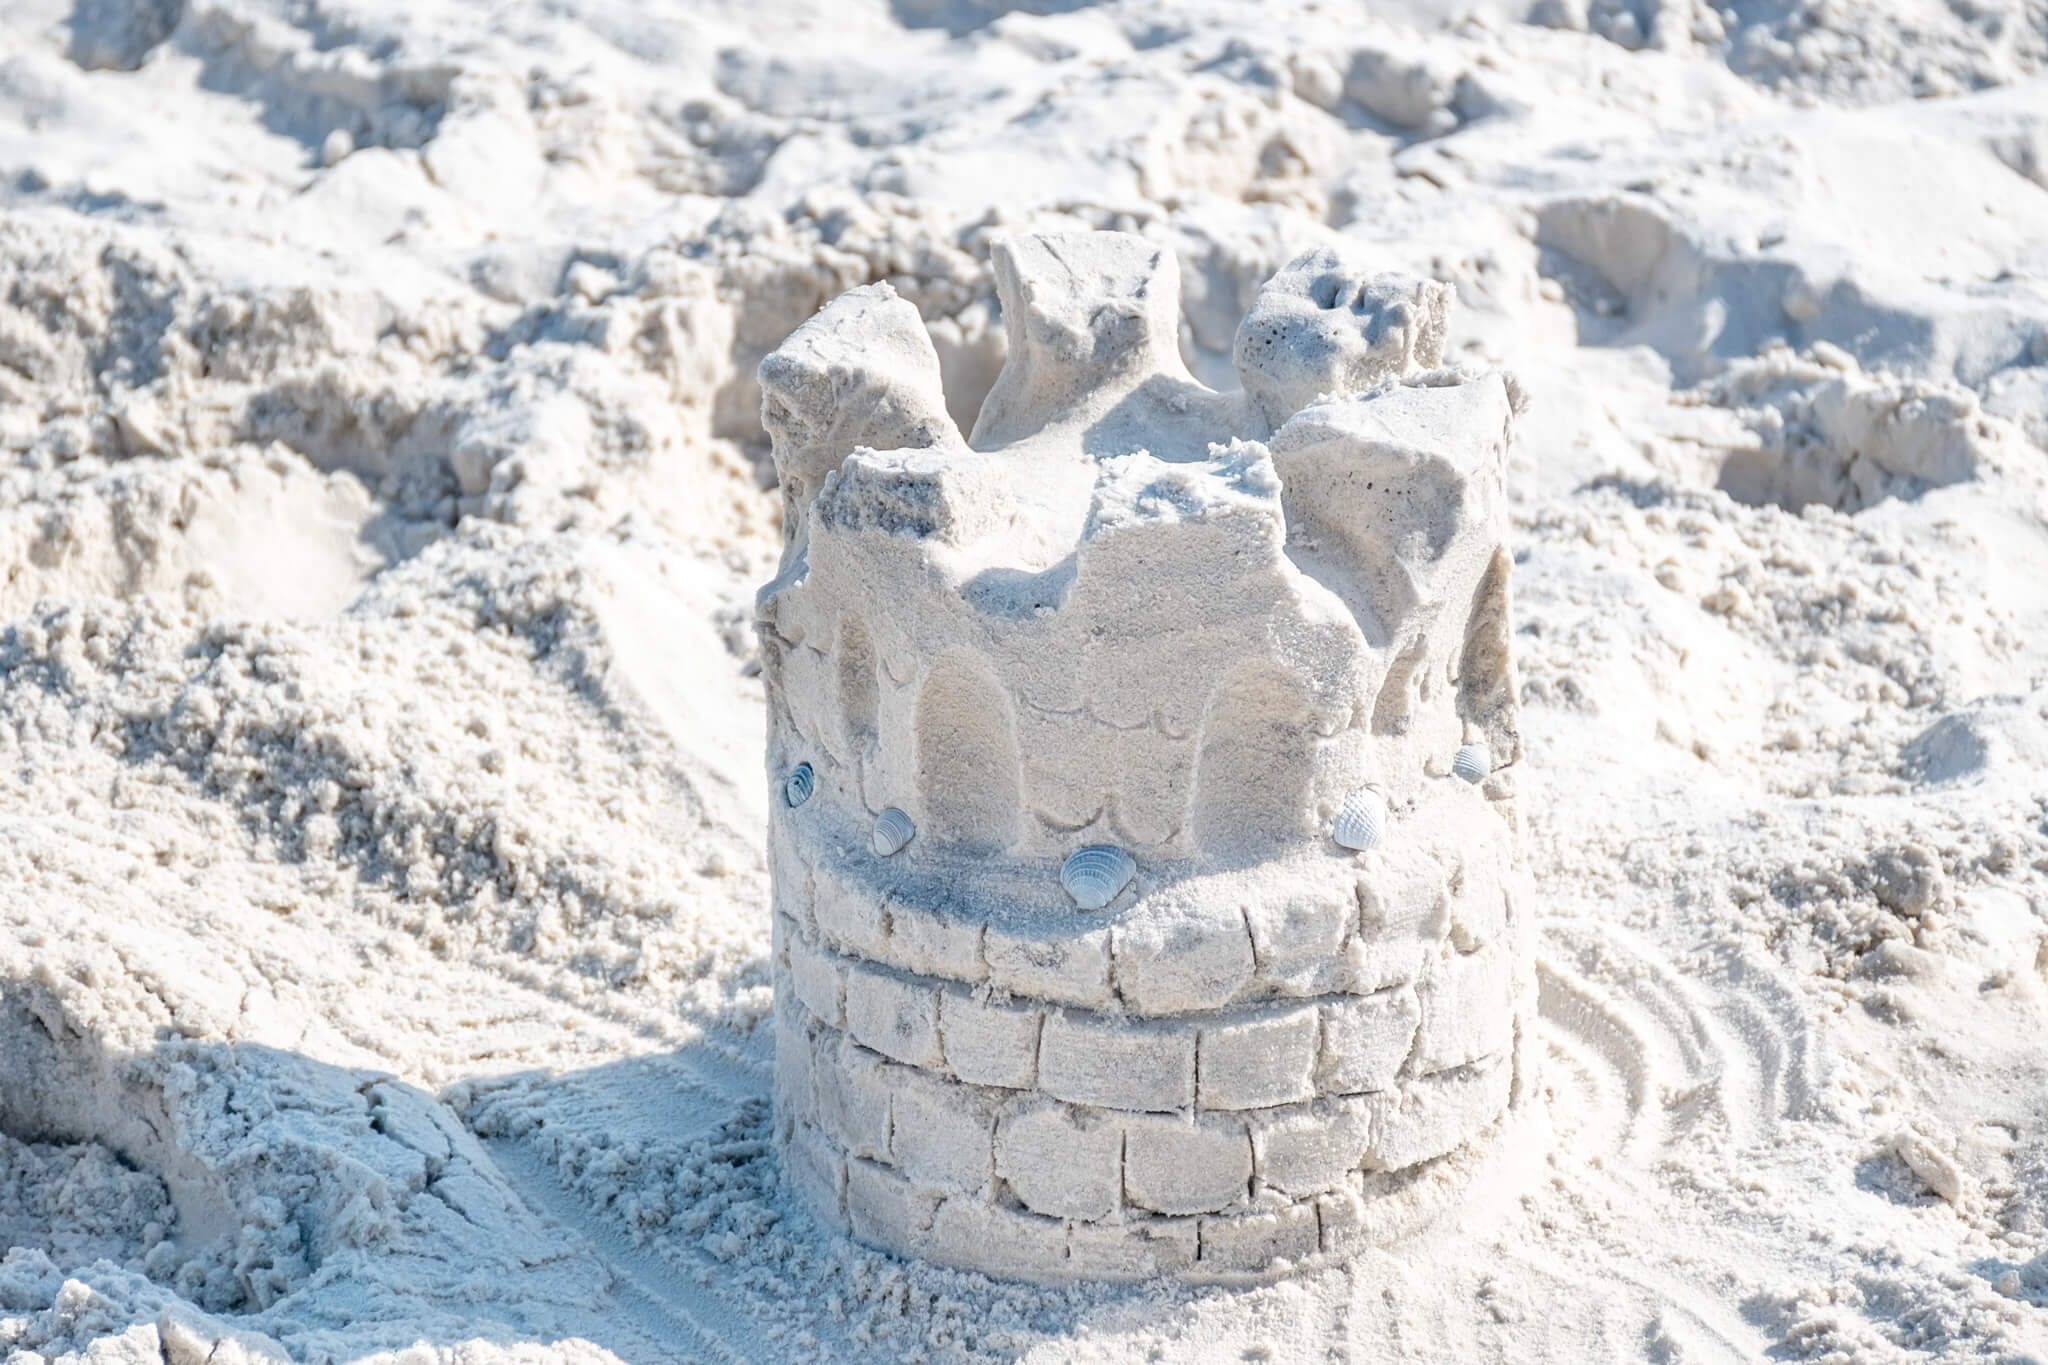 Sandcastle Lessons in Gulf Shoes